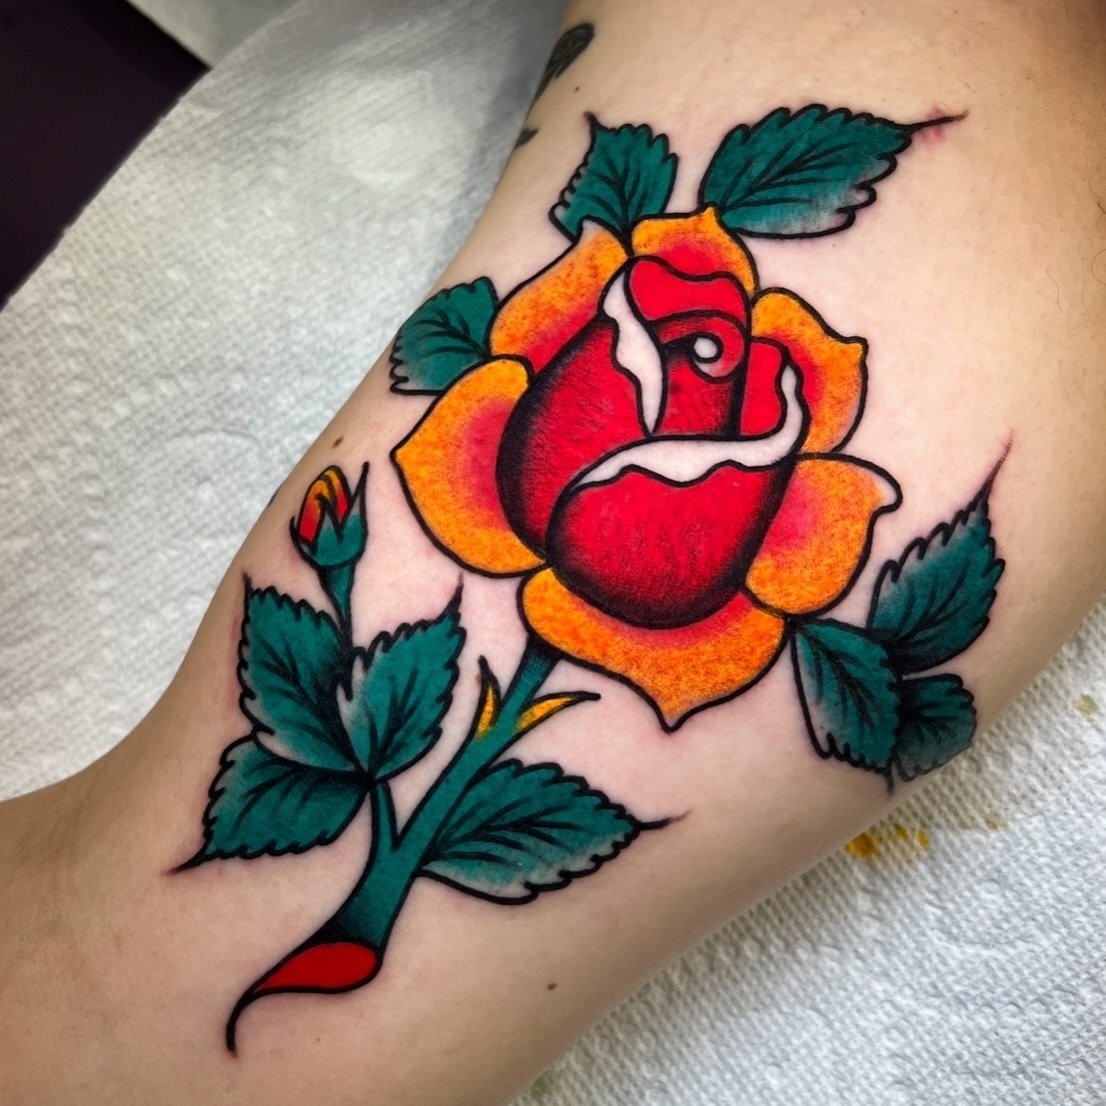 Recent 🌹 by Rosie !

For appointments, contact @rosievans directly.